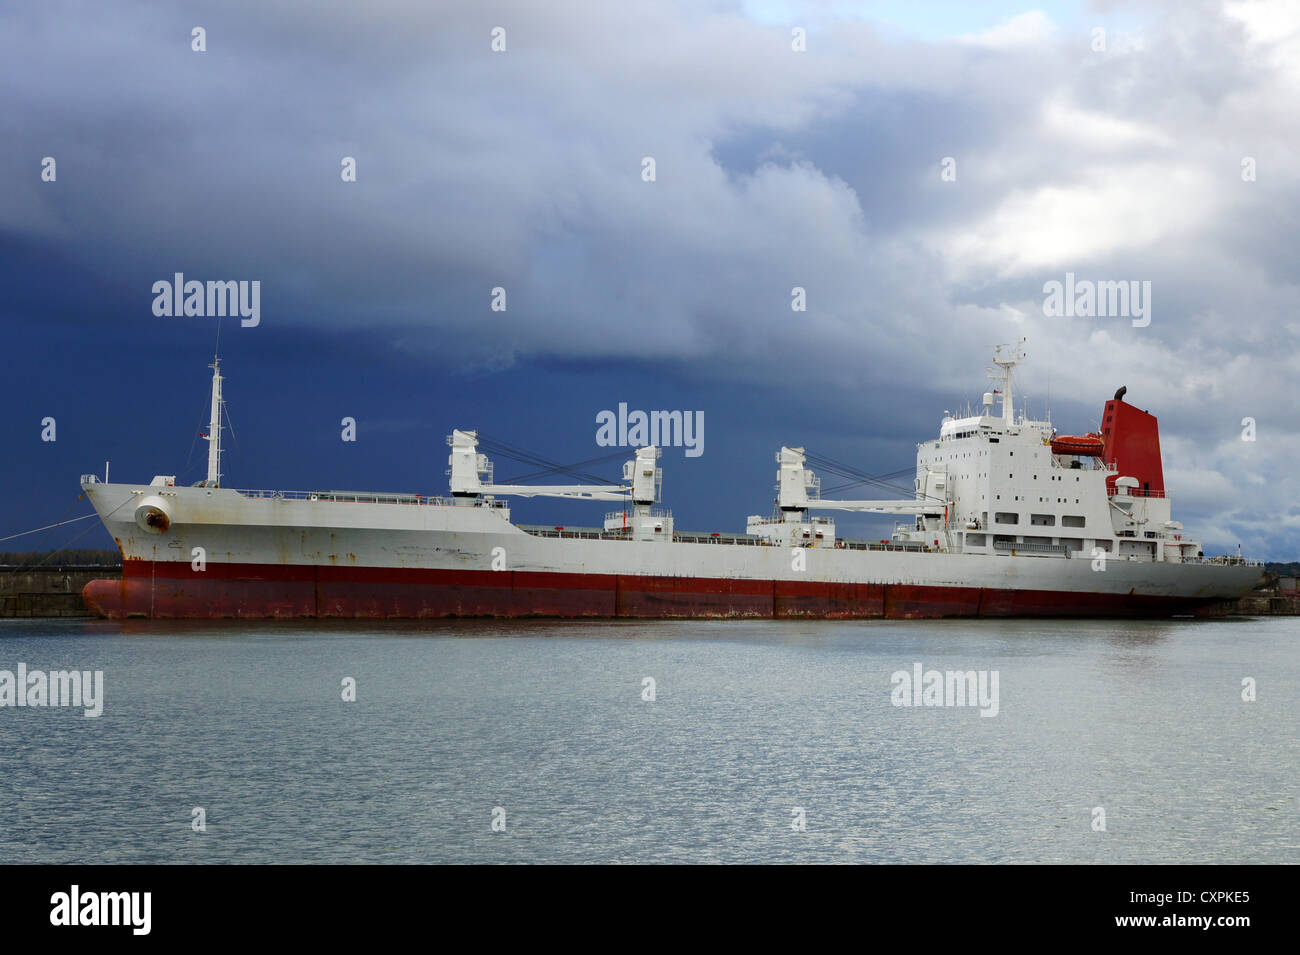 The cargo ship costs at a mooring Stock Photo